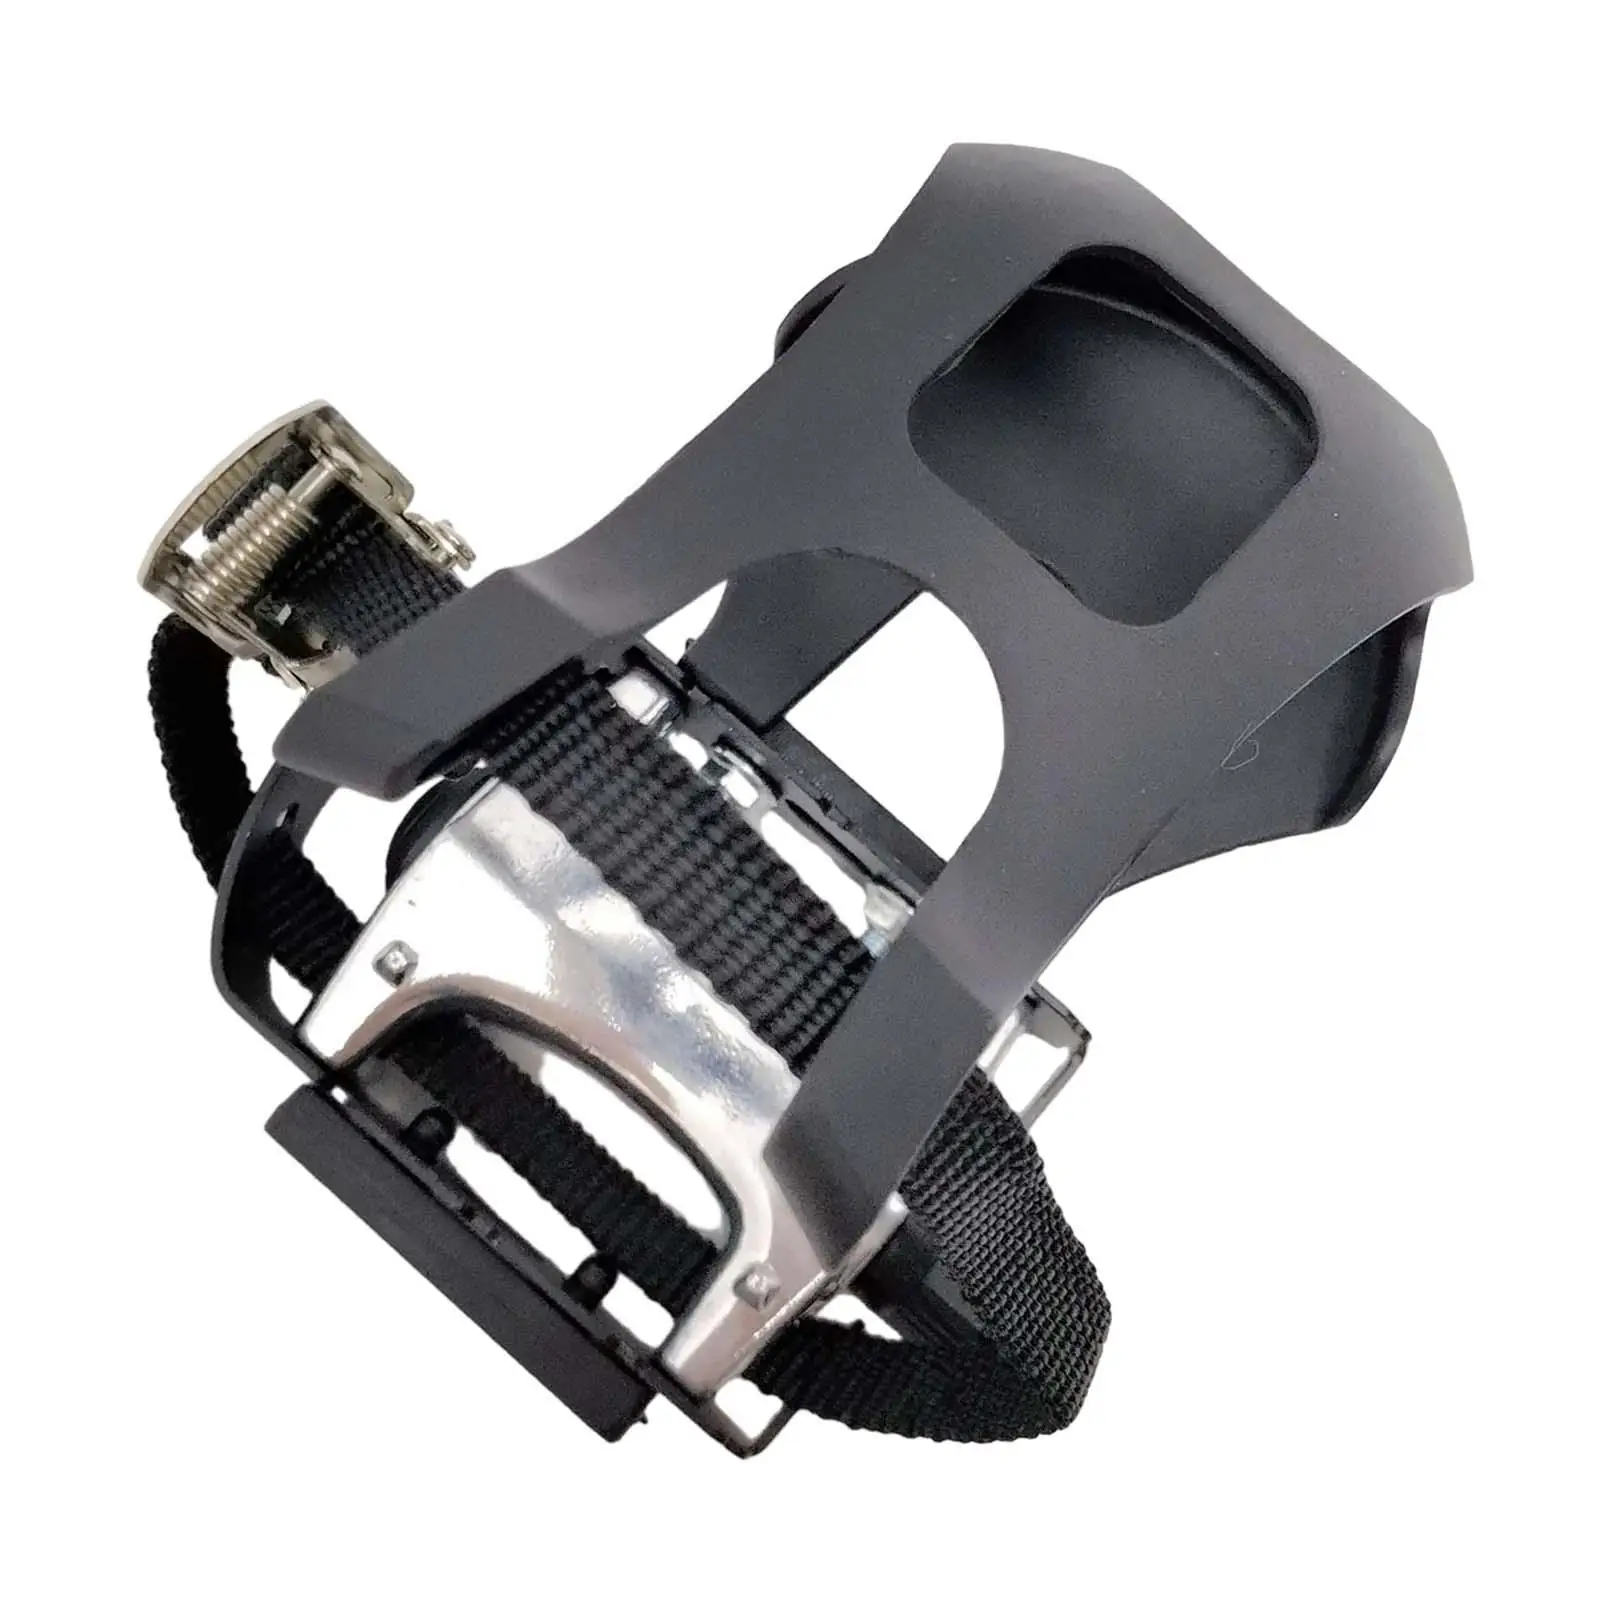 Bike Pedals with Toe Clips and Straps Bicycle Pedals for Indoor Riding Parts